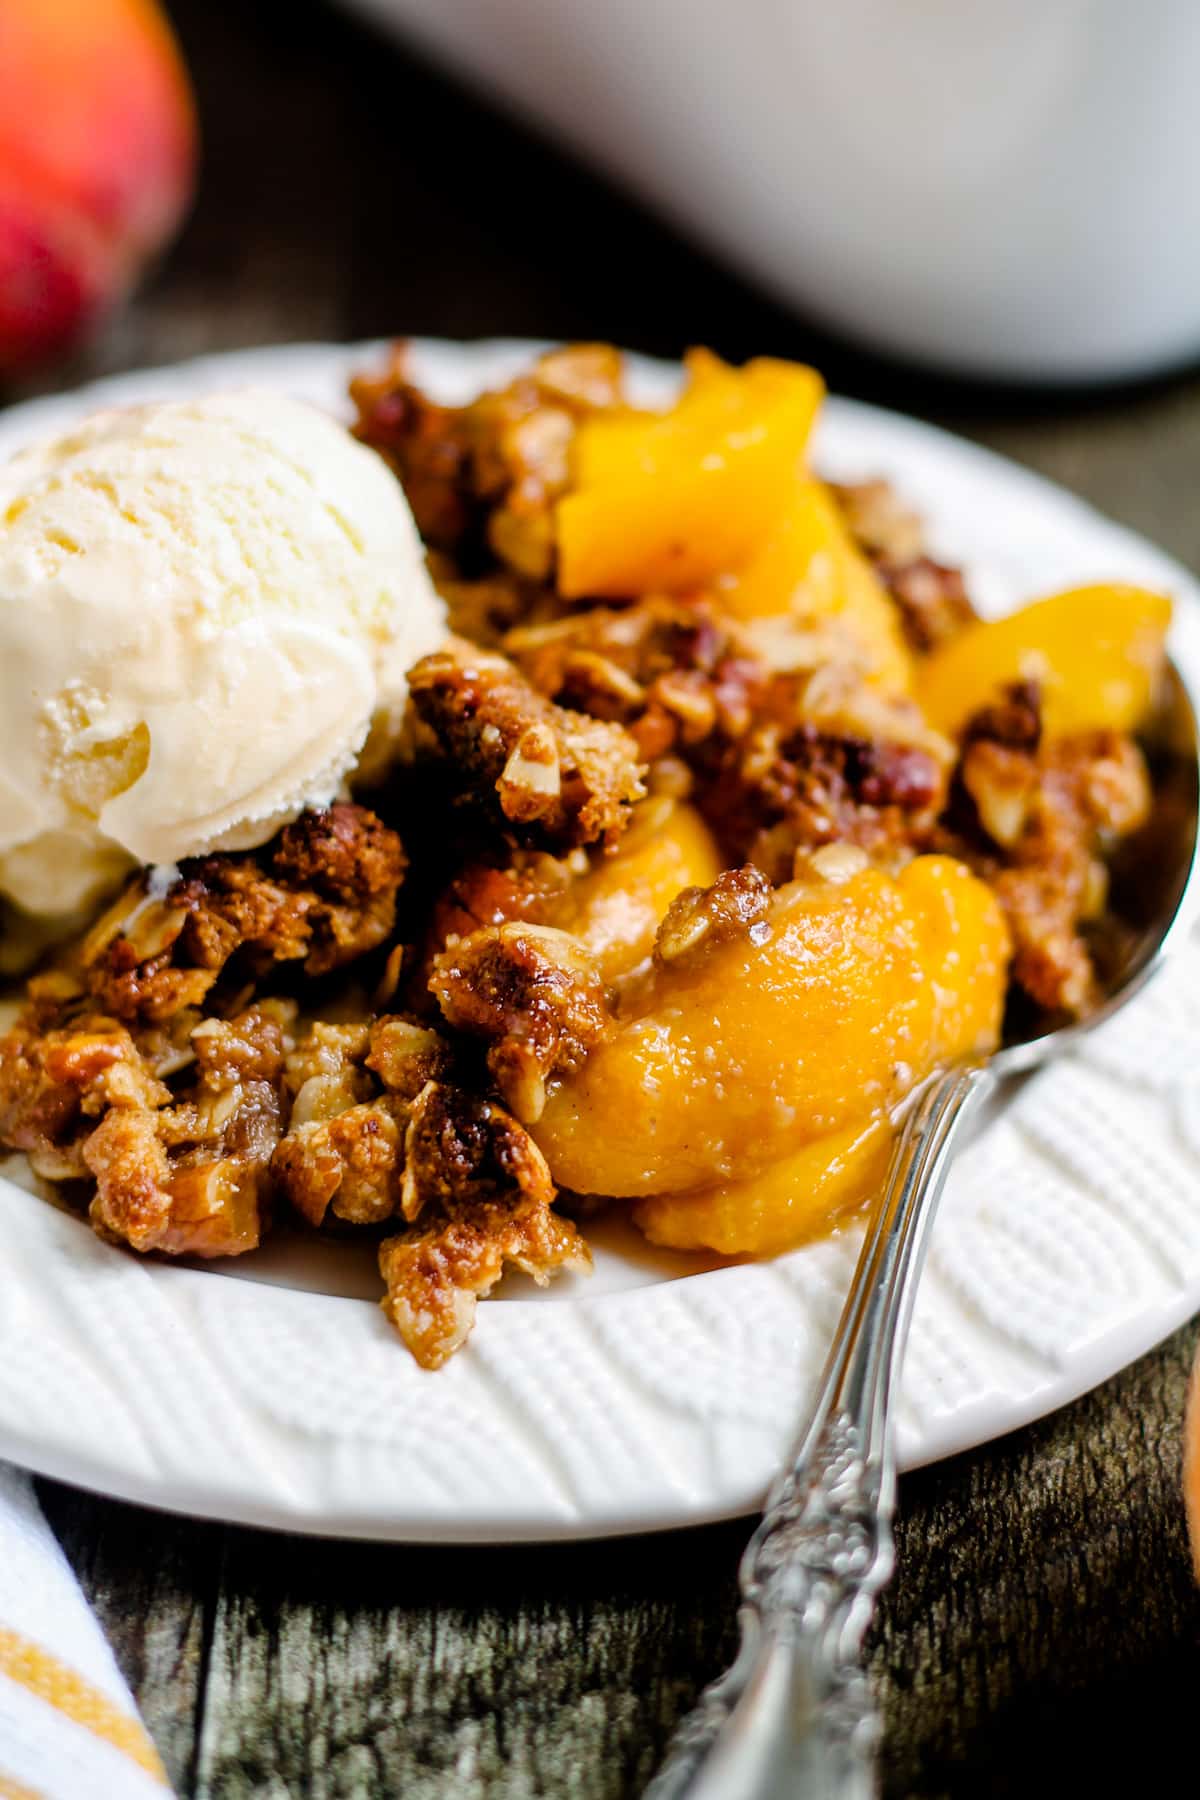 A plate of peach crisp topped with ice cream.